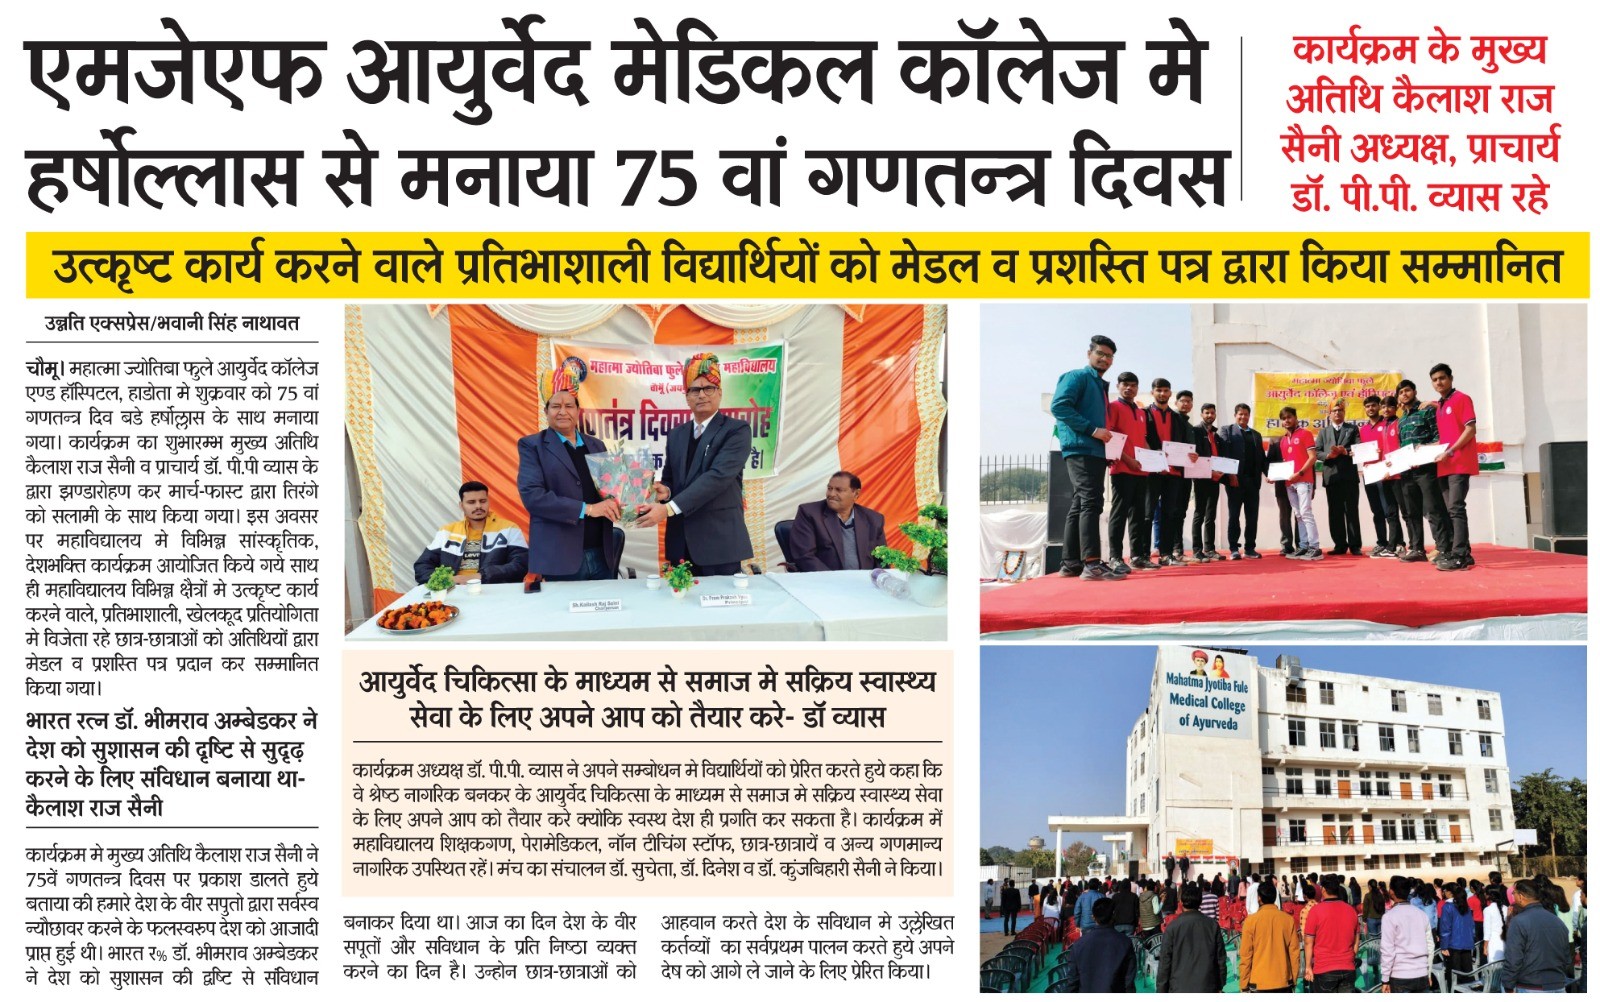 GLIMPSES OF NEWSPAPERS HEADLINES OF REPUBLIC DAY PROGRAMME ORGANISED  AT MJF GROUPS